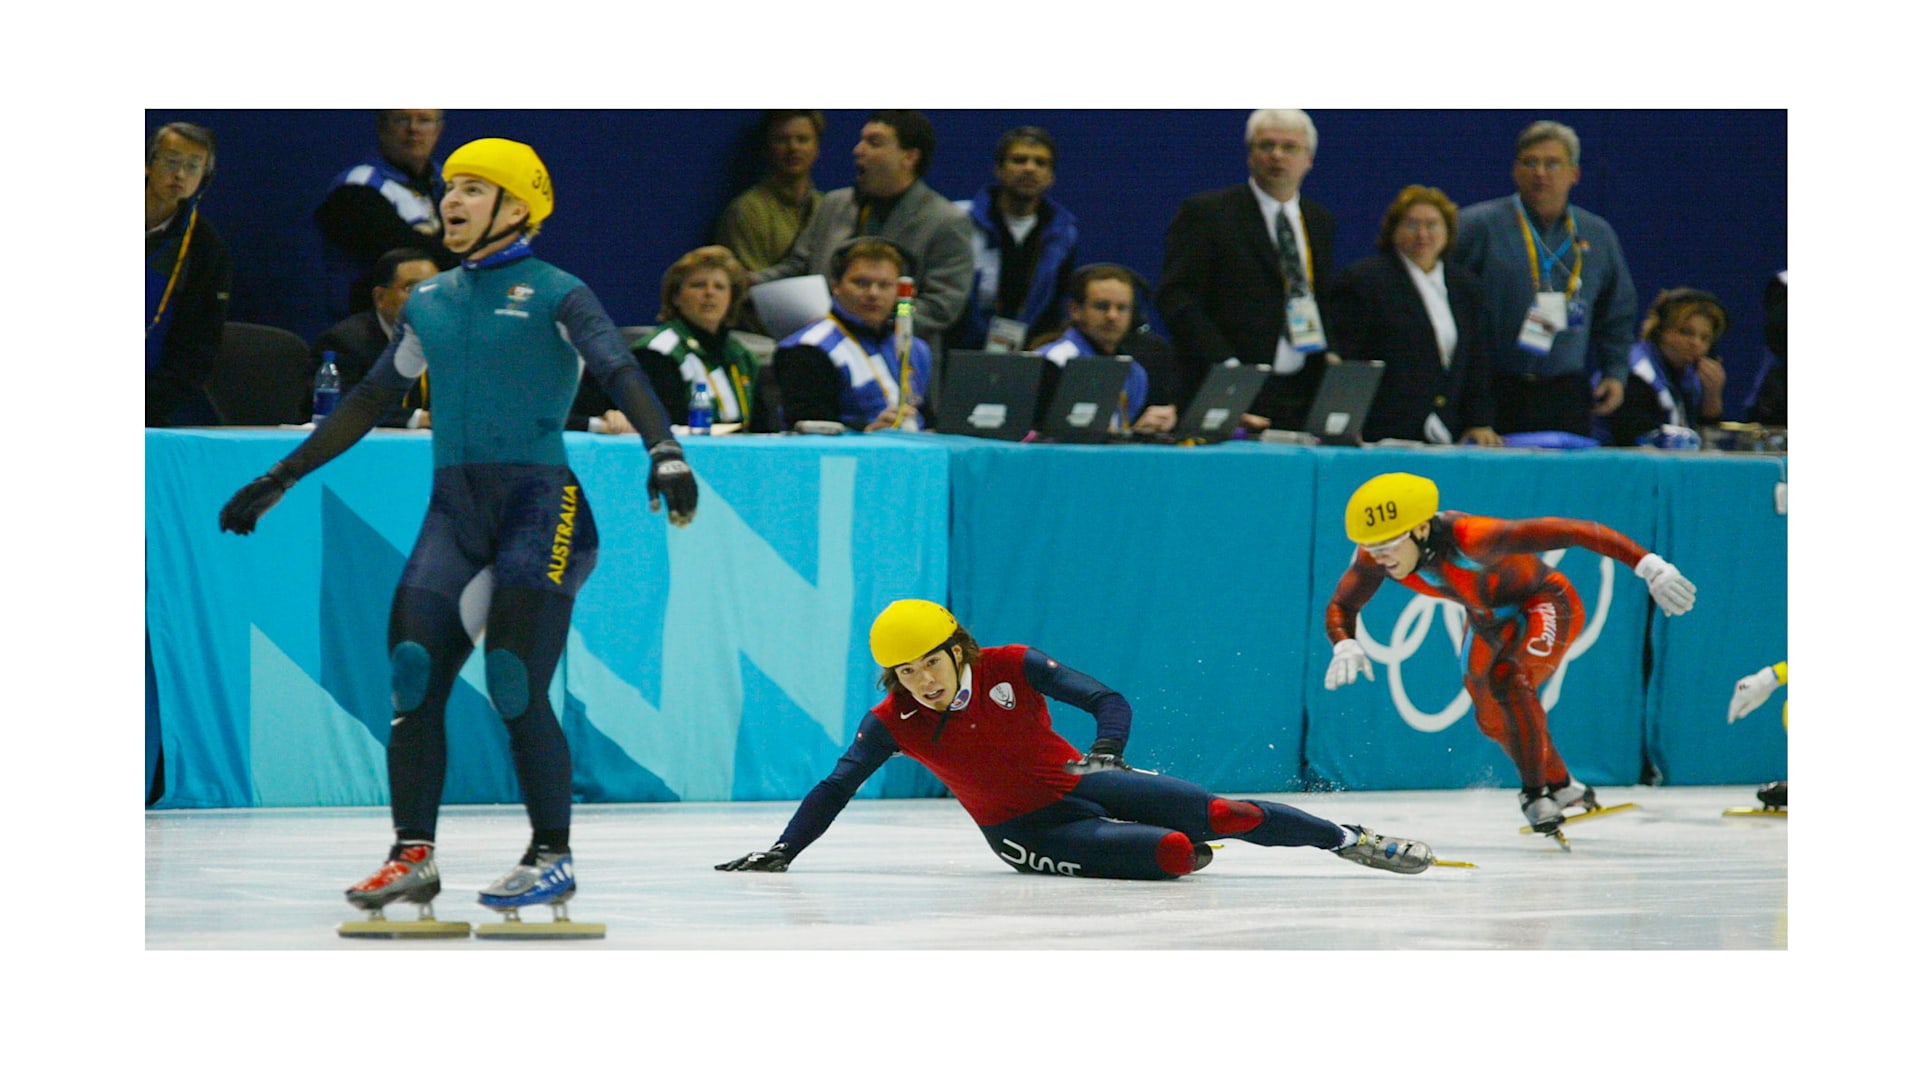 Snapped: The moment Steven to Olympic - Olympic